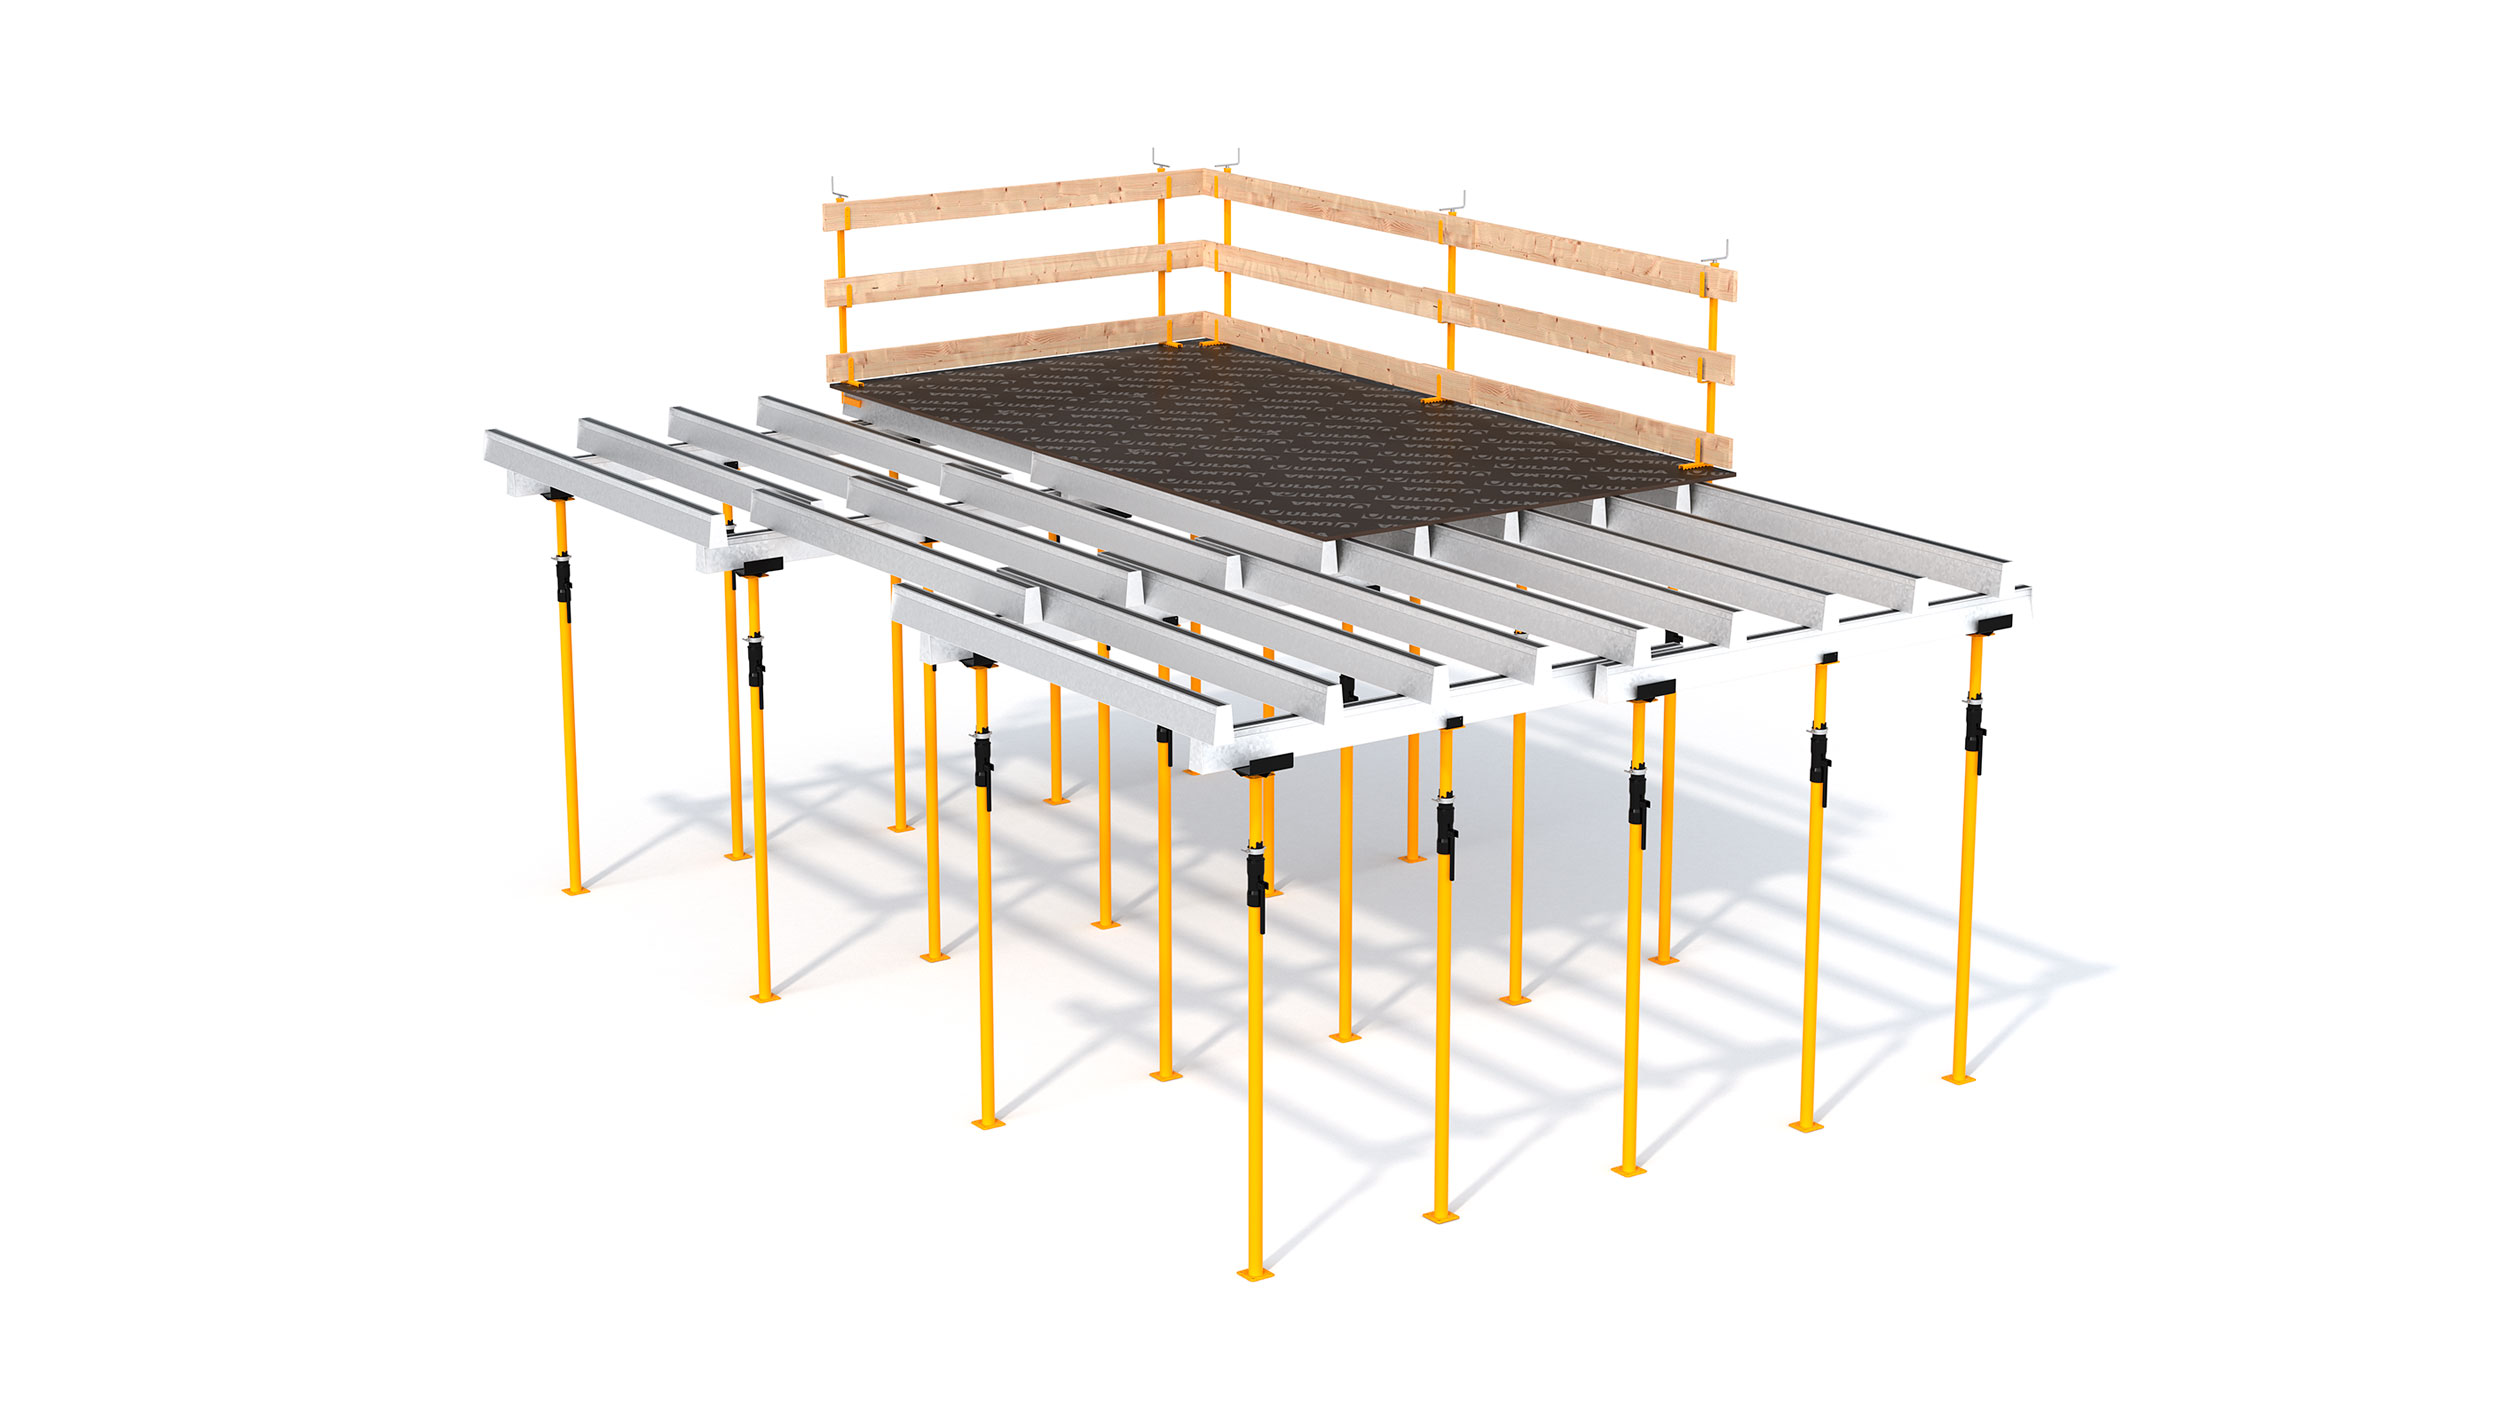 Beam formwork system easily adaptable to any geometry. It incorporates few components and is easy and fast to assemble. Perfect system for slab construction within walls.